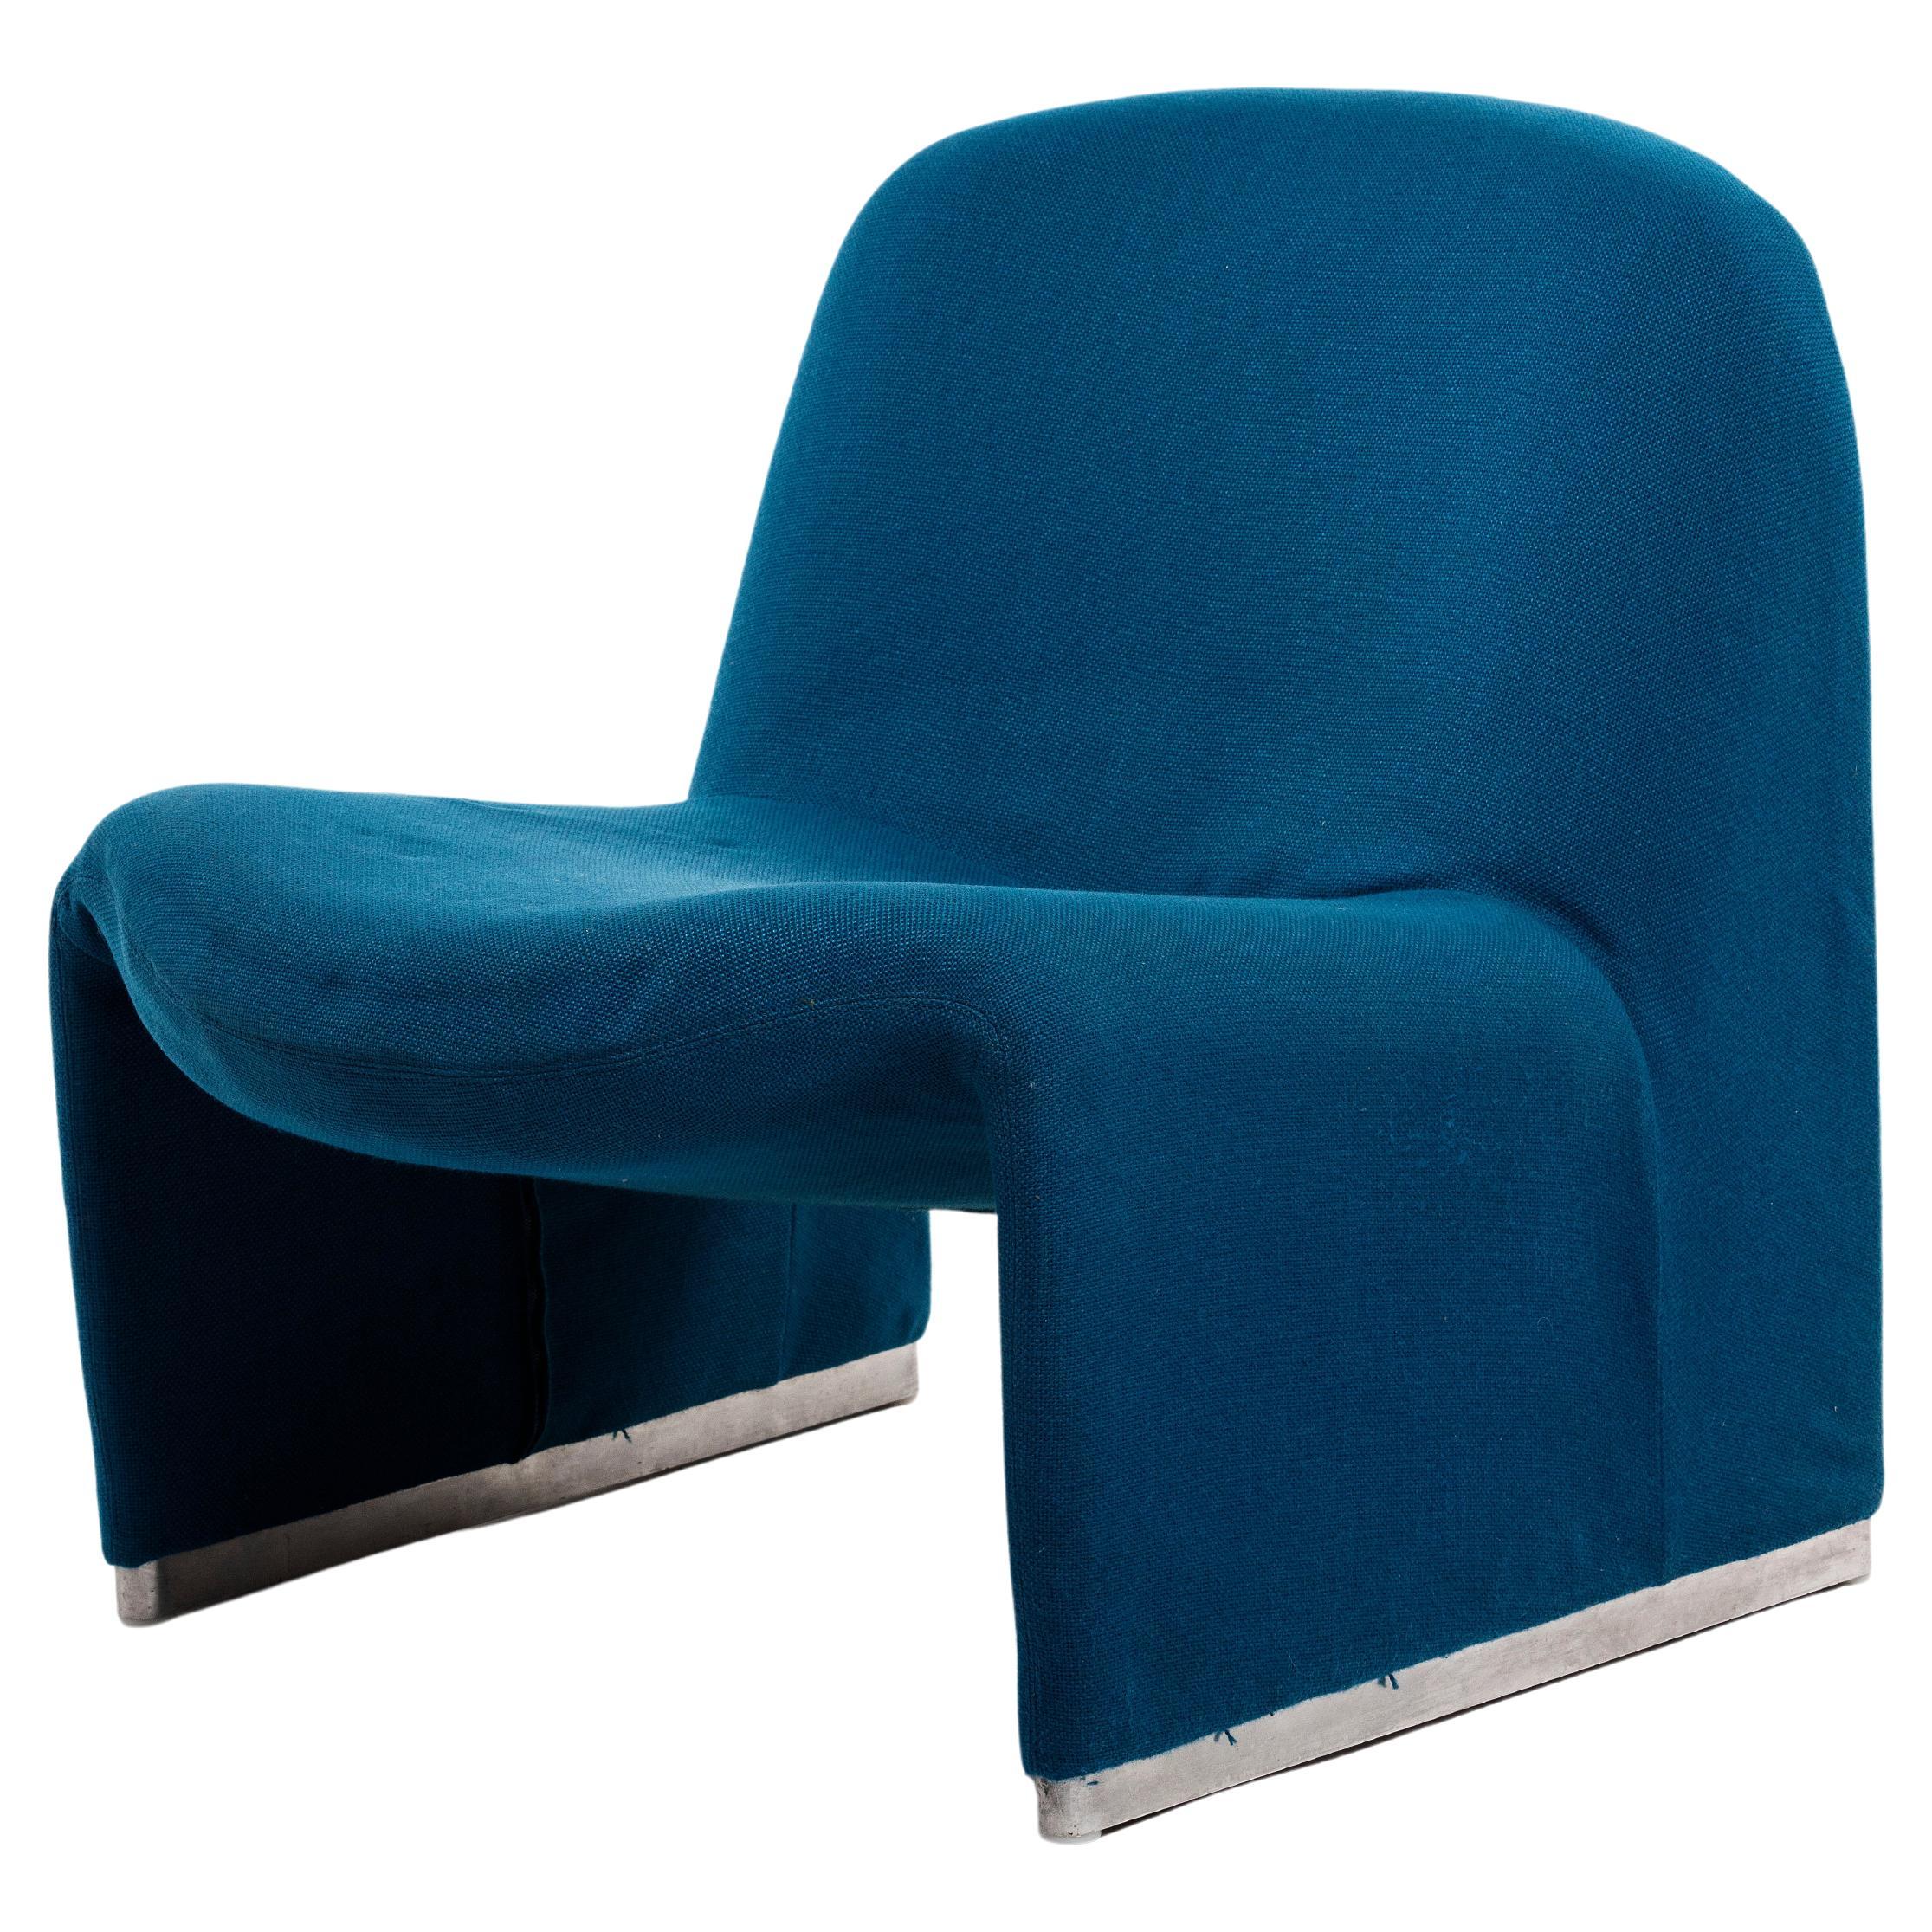 Giancarlo Piretti Iconic Alki Lounge Chair in Original Blue Upholstery Castelli For Sale